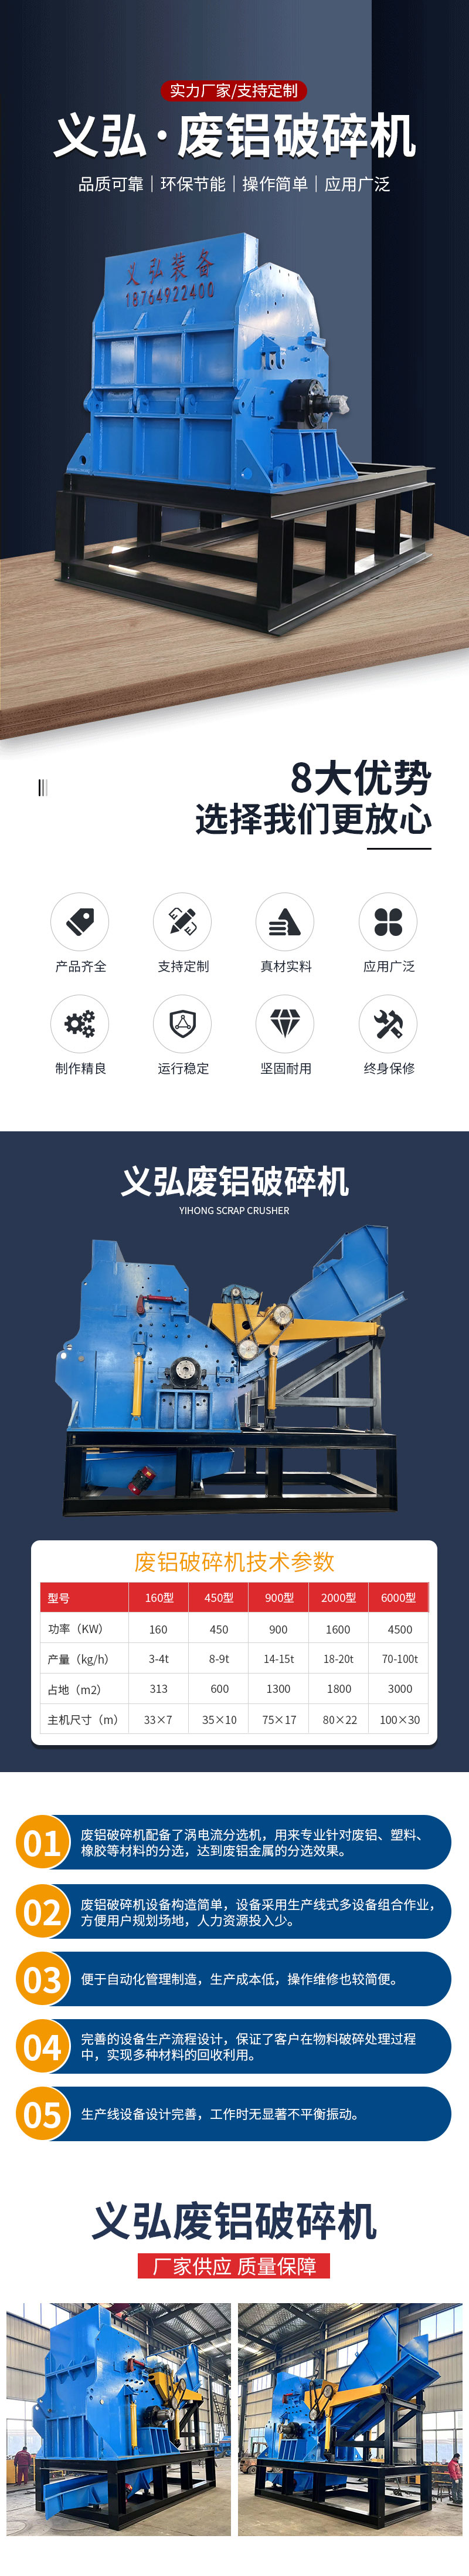 Color steel tile kneading ball machine, automobile steel plate crusher, cab crusher, scrap steel crushing equipment